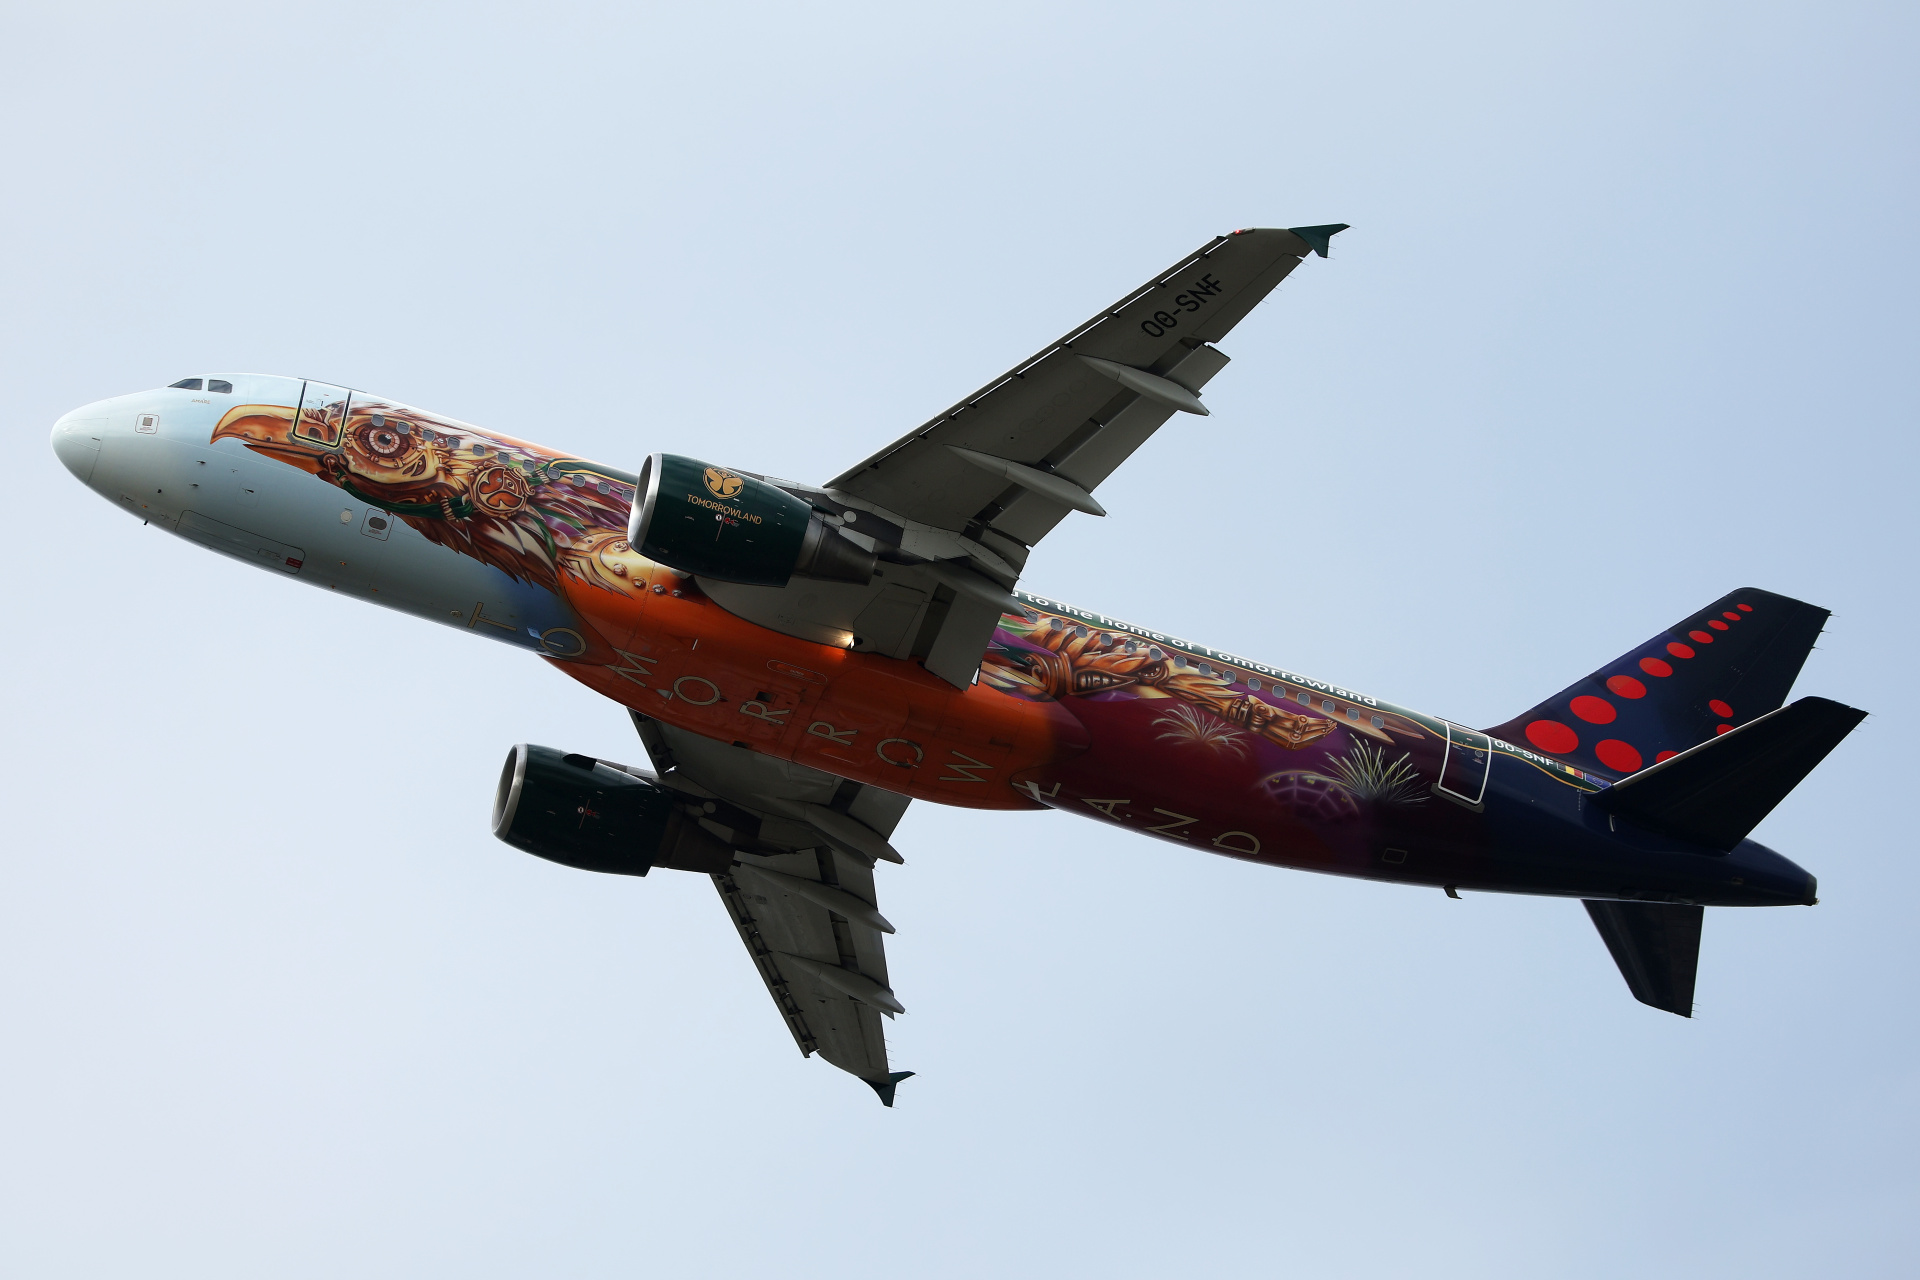 OO-SNF (Belgian Icons - Amare: Tomorrowland livery) (Aircraft » EPWA Spotting » Airbus A320-200 » Brussels Airlines)